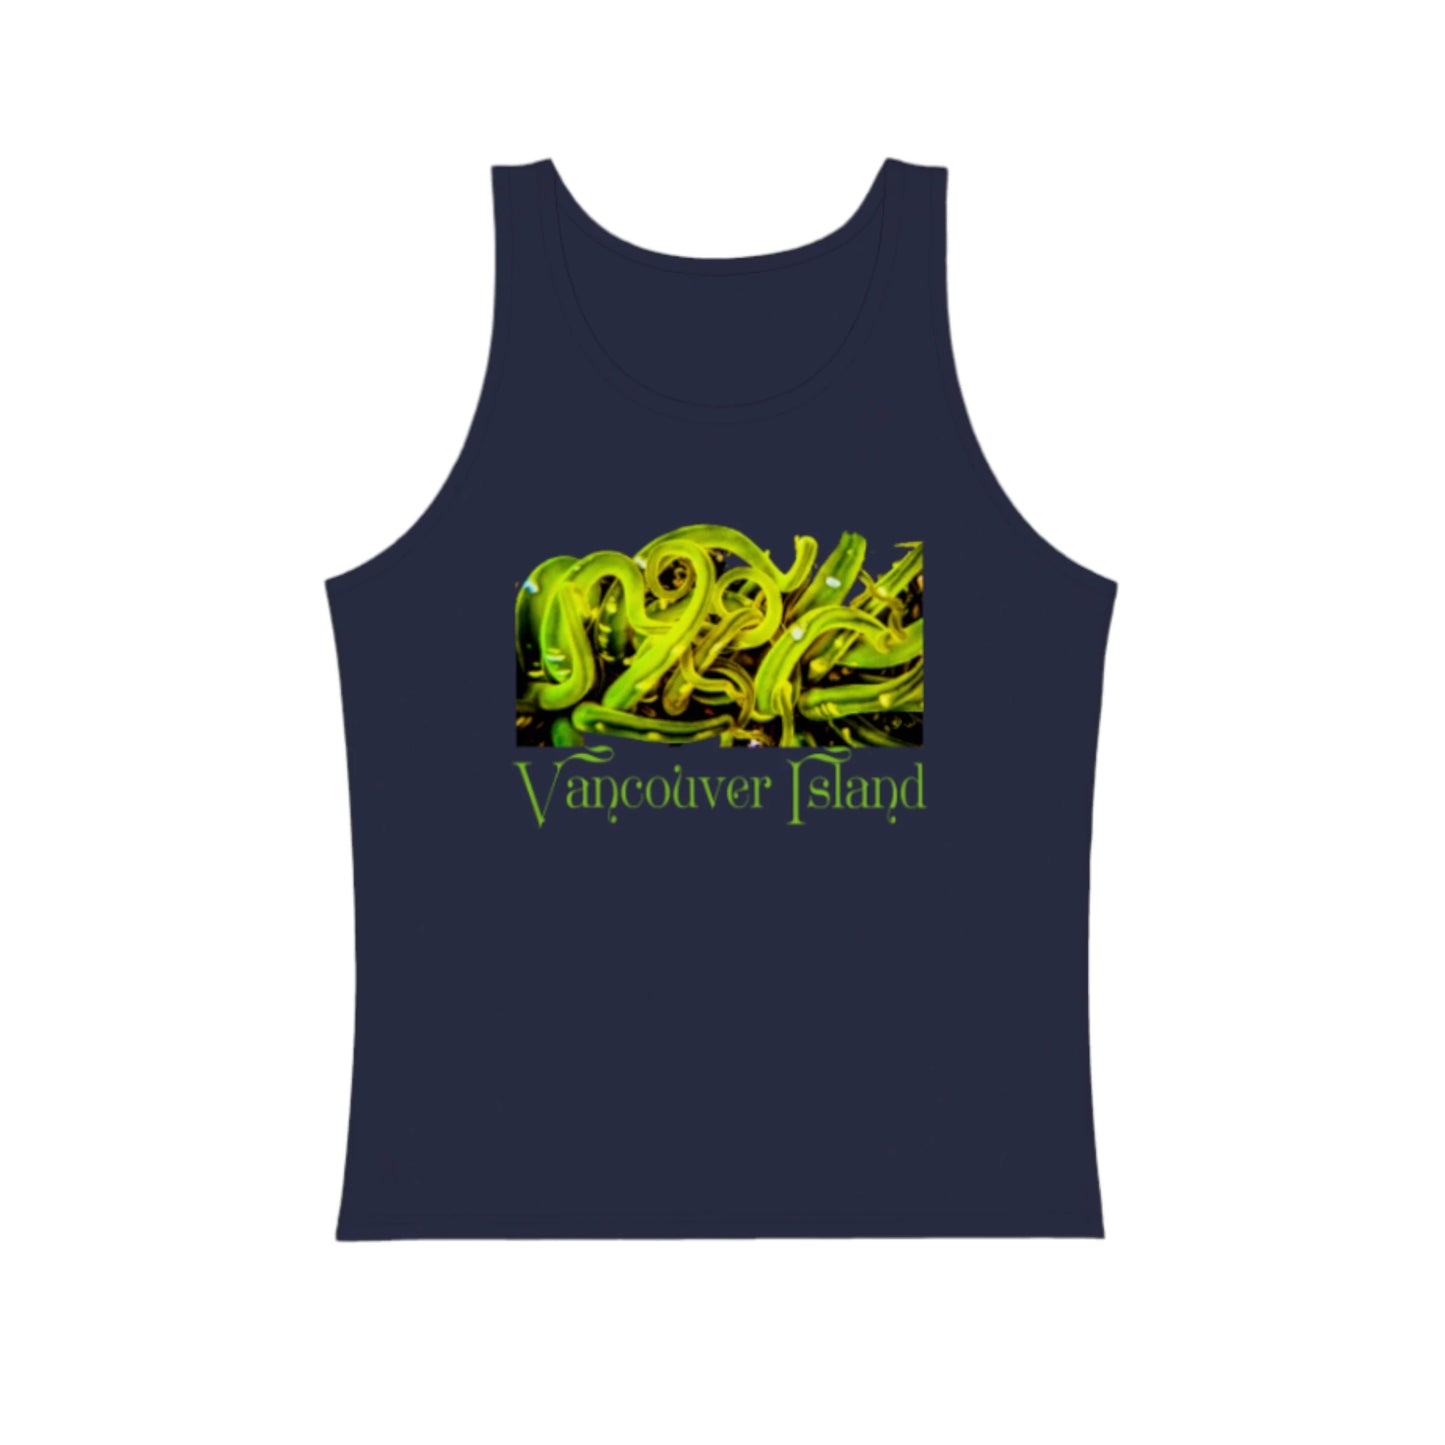 Sea Anemone Vancouver Island premium unisex tank top in naavy.  The green sea anemone is underwater on the front of the top. by van isle goddess dot com